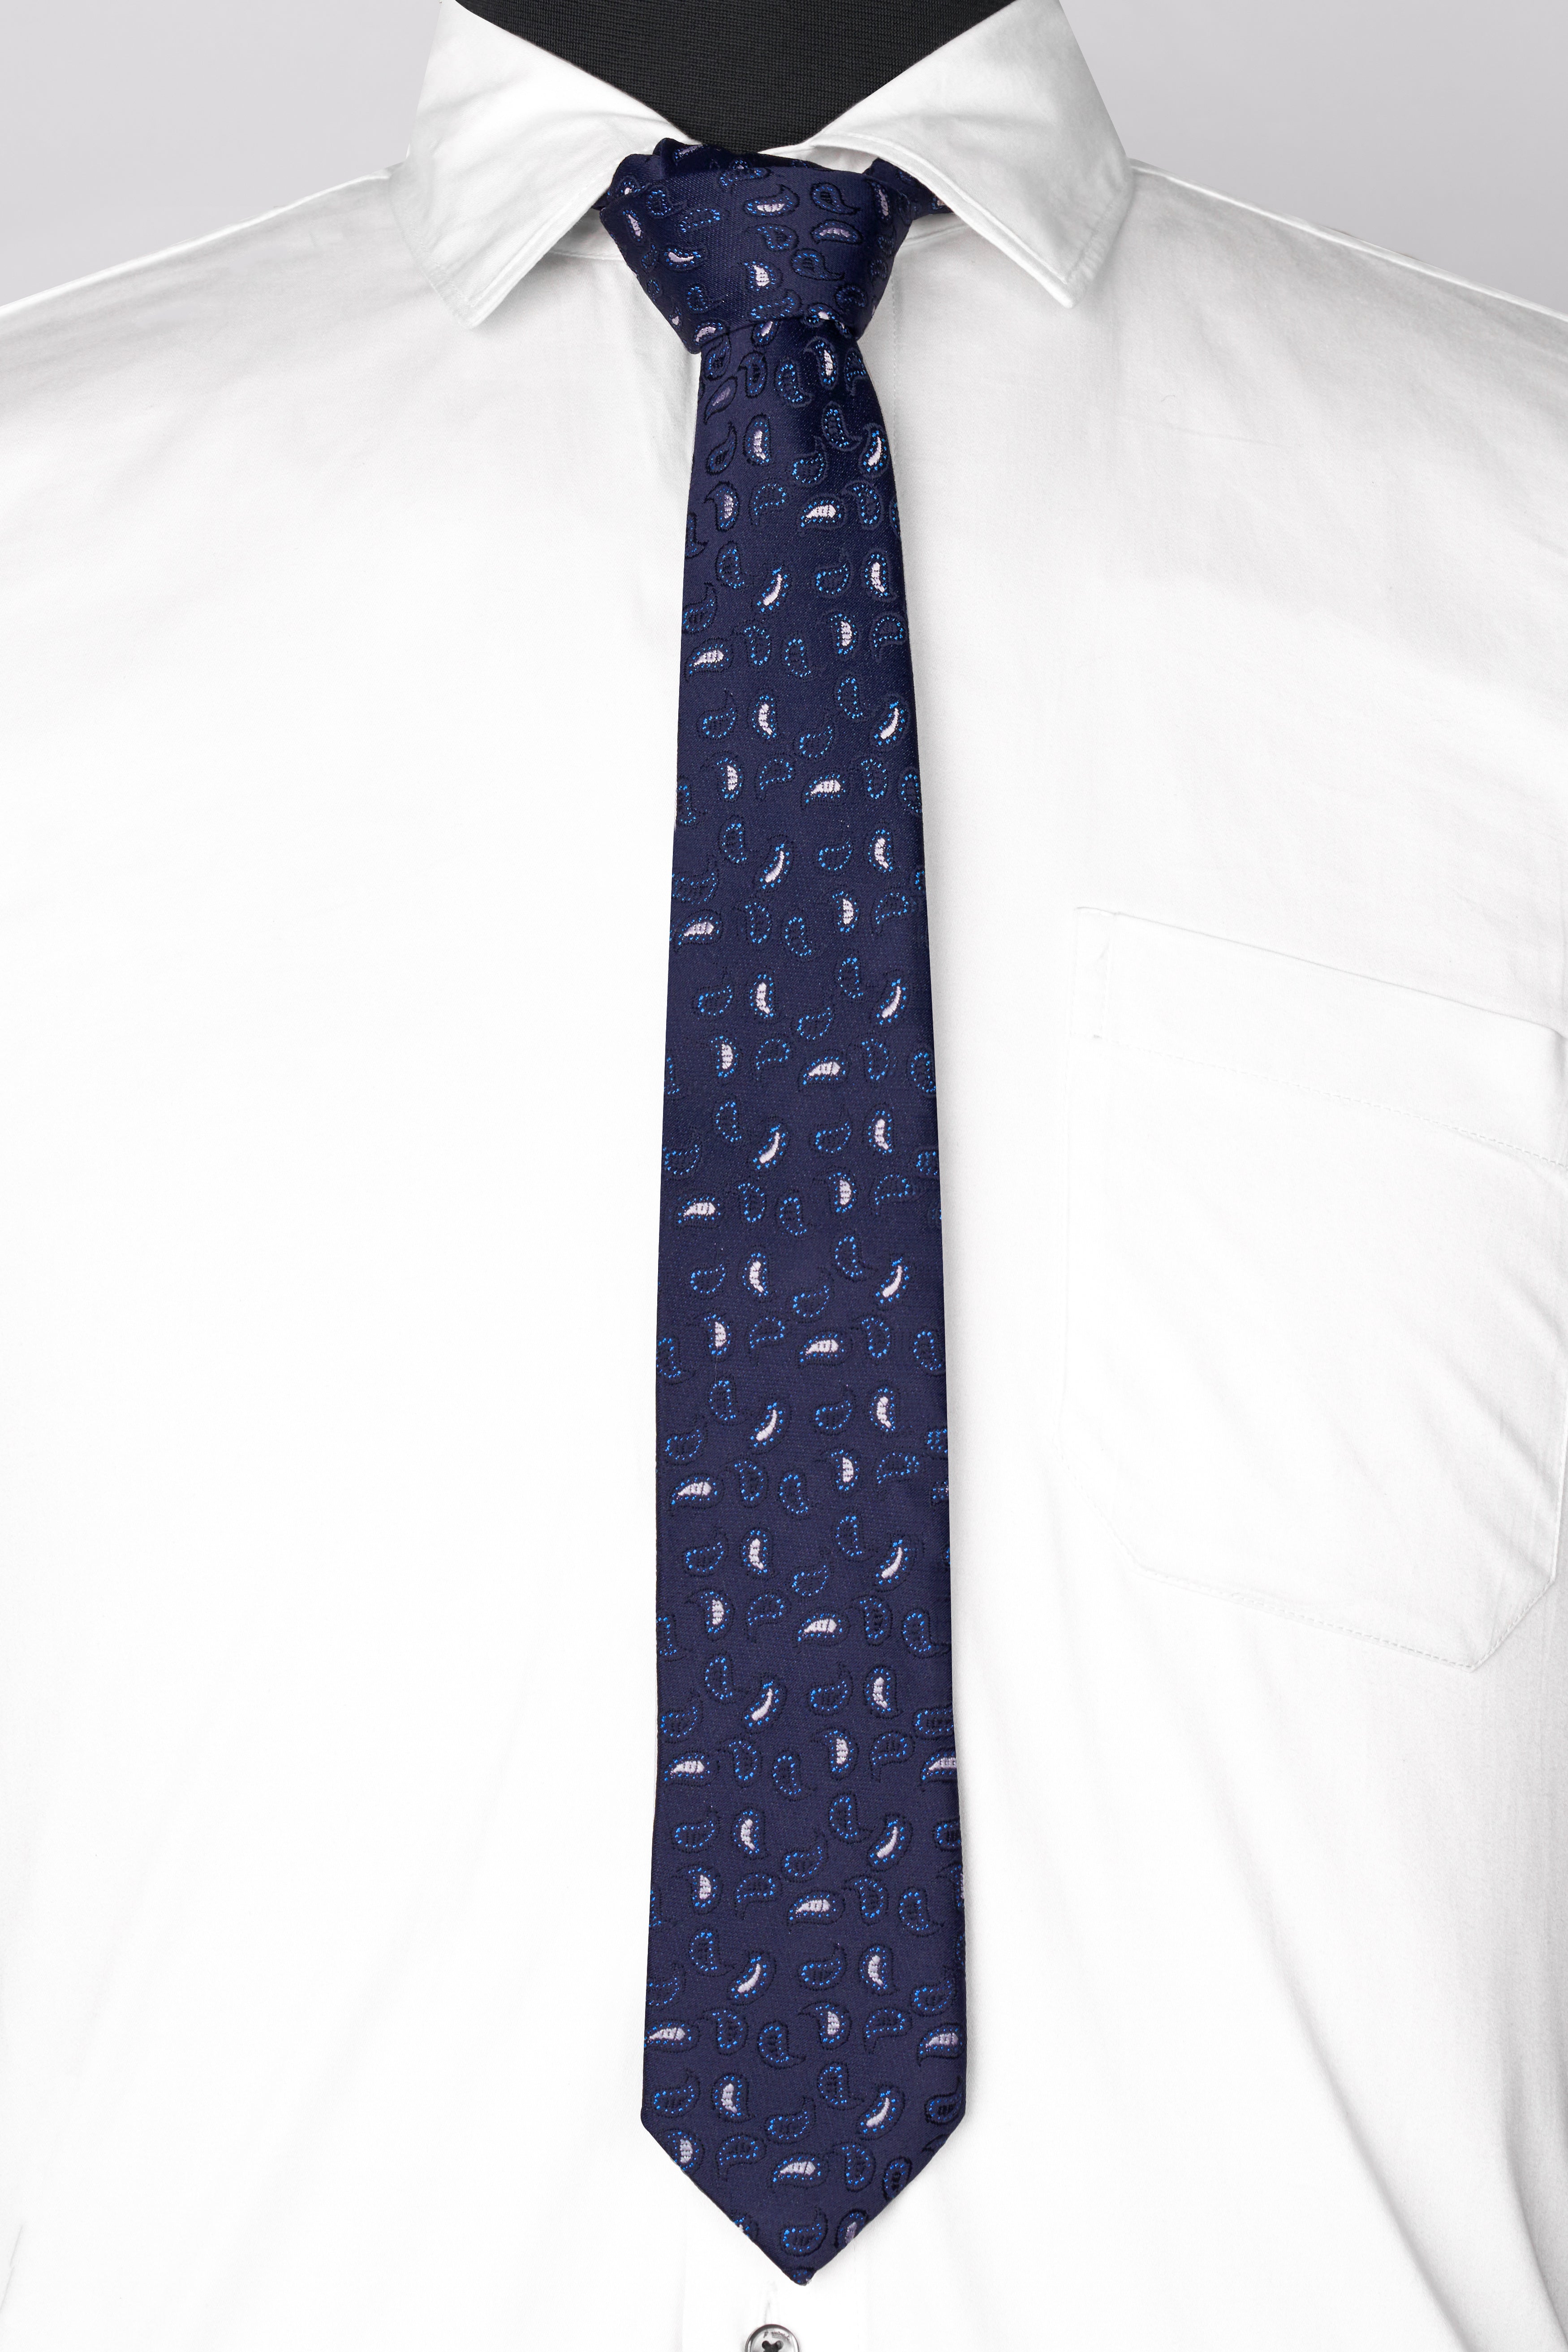 Martinique Navy Blue and White Paisley Jacquard Tie with Pocket Square